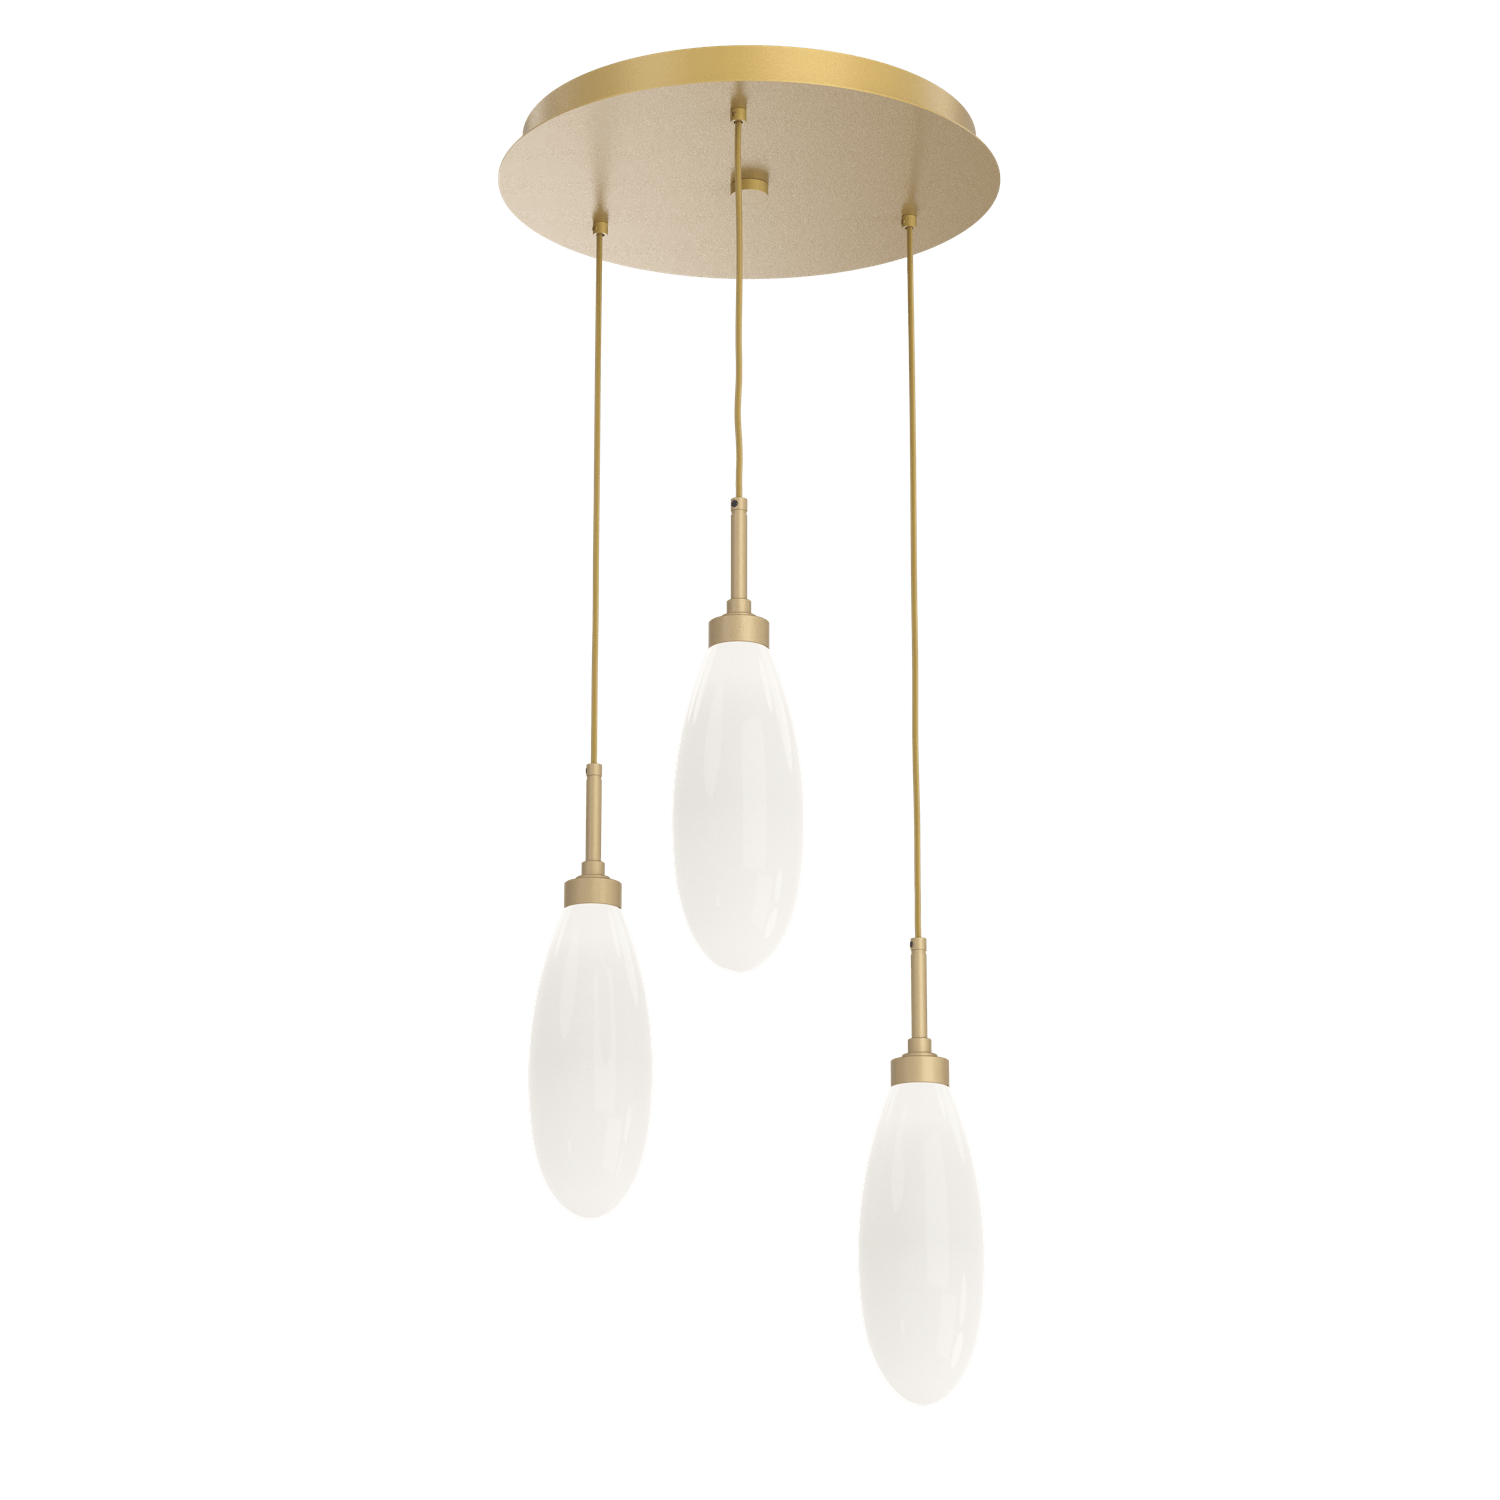 CHB0071-03-GB-WL-LL-Hammerton-Studio-Fiori-3-light-round-pendant-chandelier-with-gilded-brass-finish-and-opal-white-glass-shades-and-LED-lamping